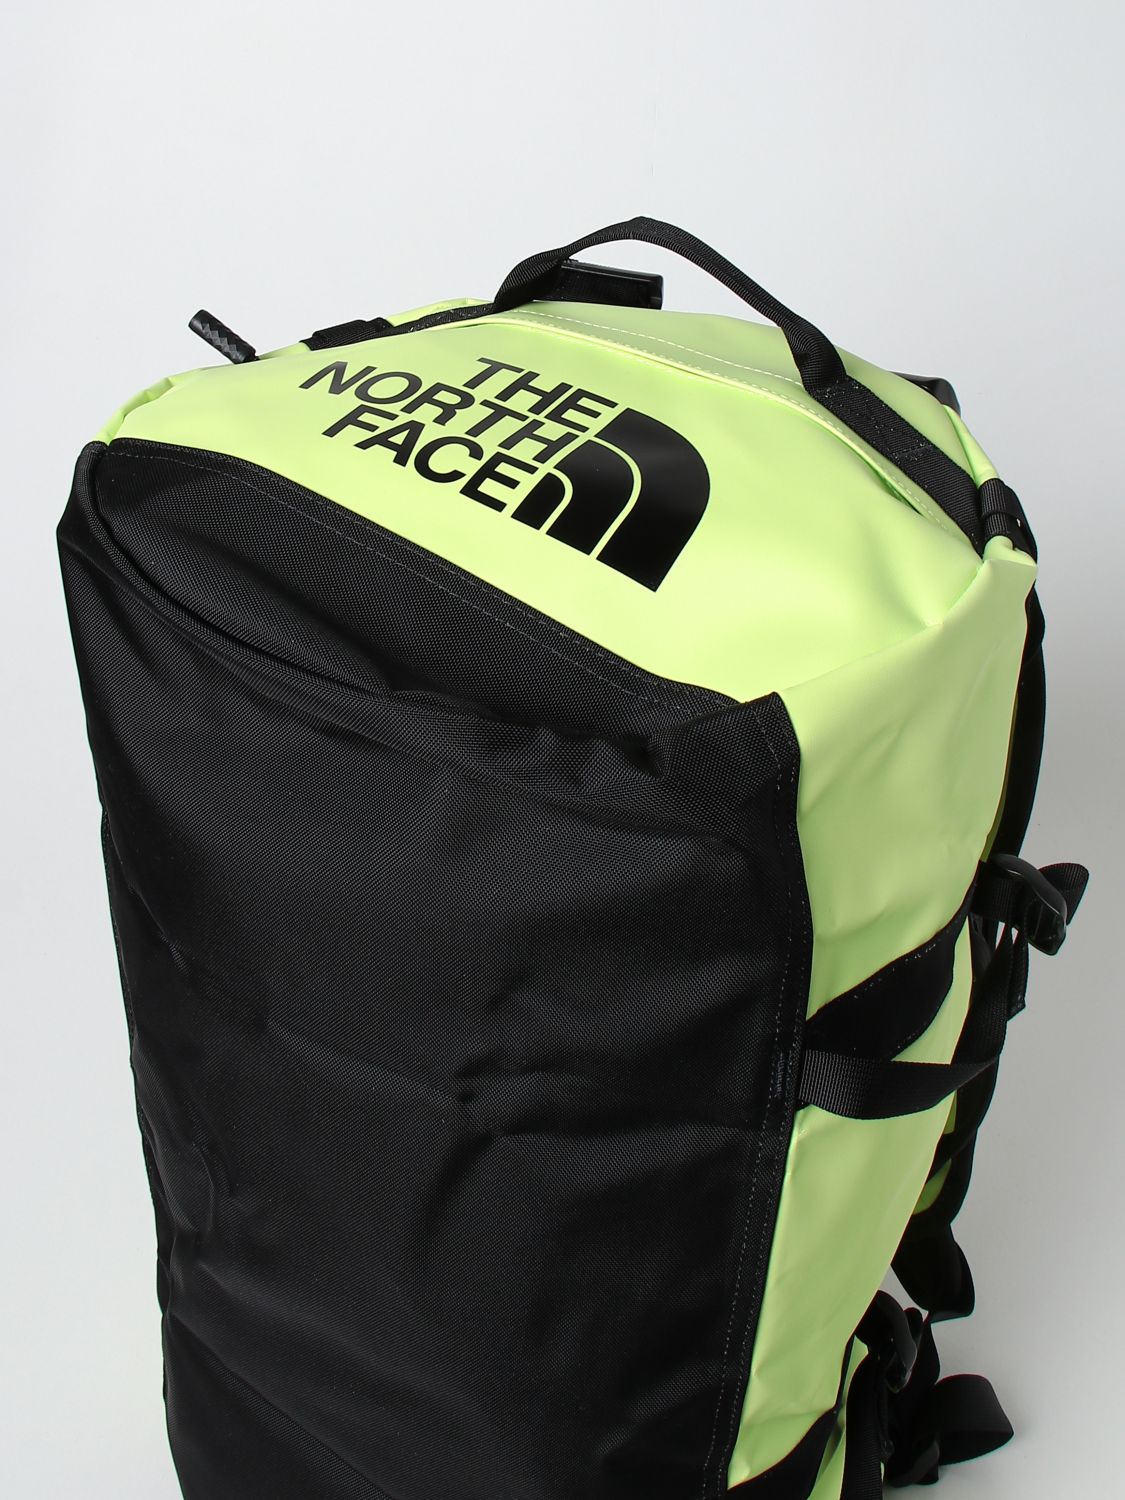 Backpack The North Face: The North Face Base Camp Duffel S rucksack in technical fabric green 3